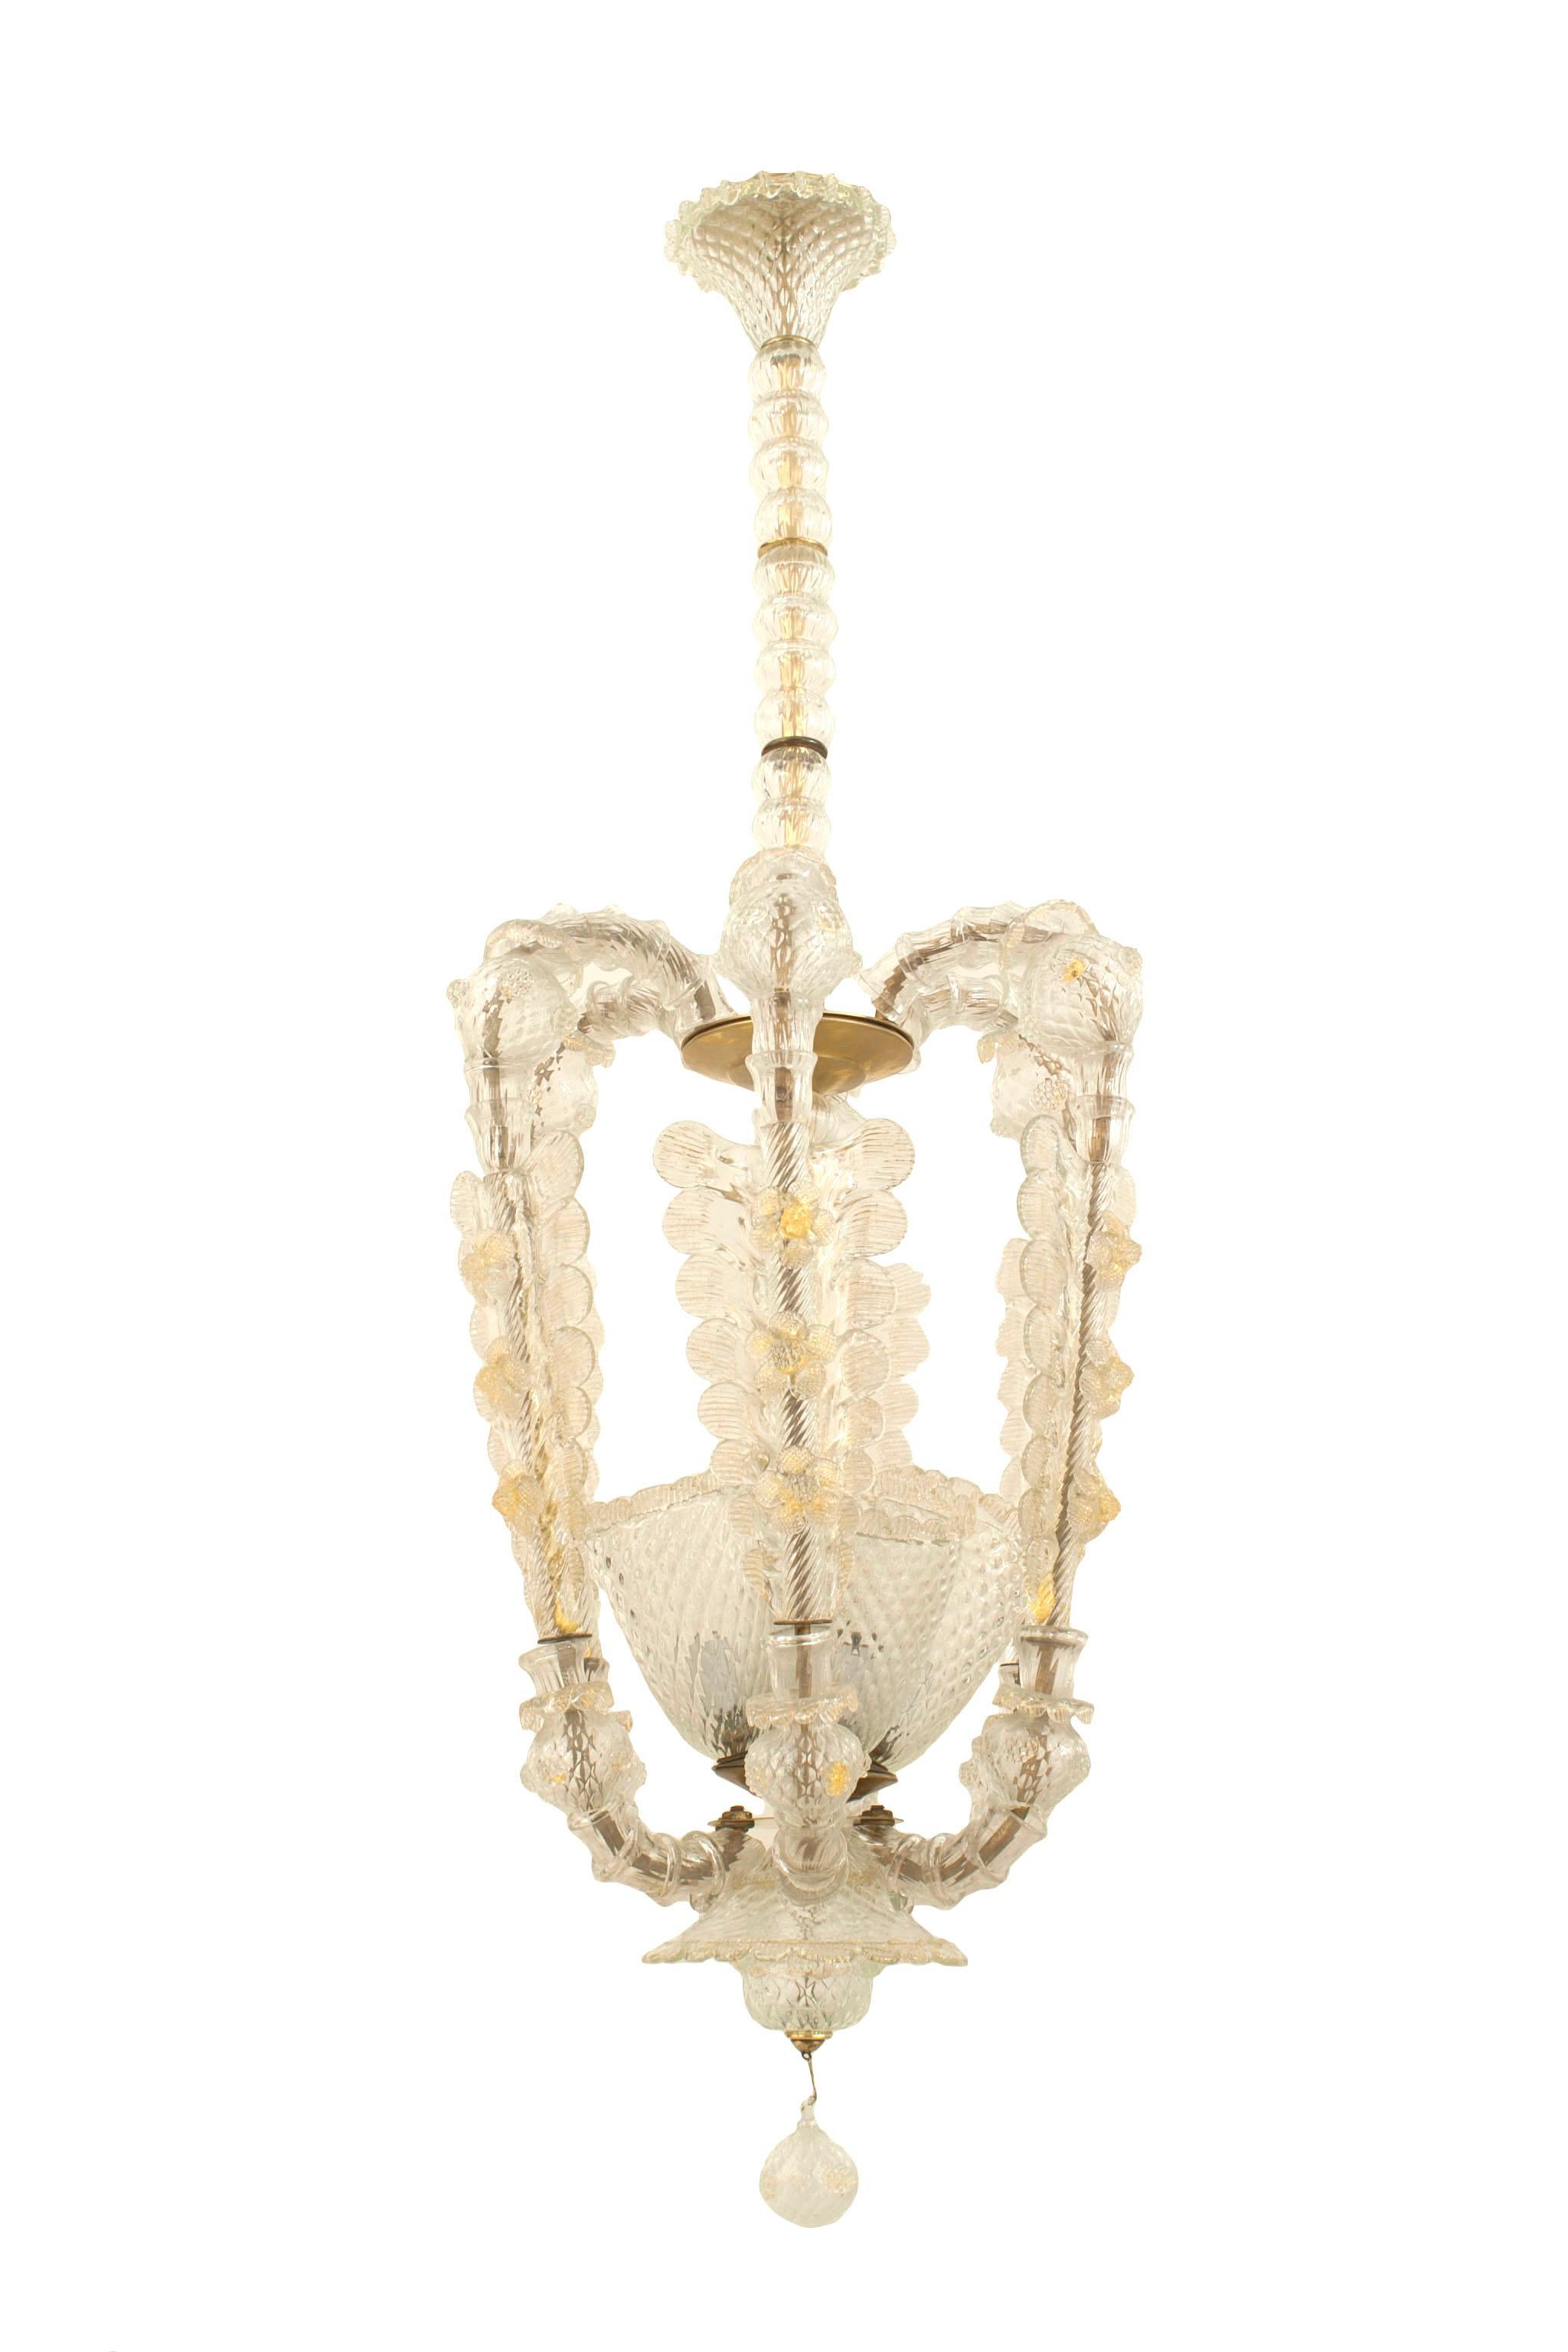 Italian Art Deco clear glass lantern form chandelier with 4 internal uplight shades surrounded by 6 feather supports suspended by a spool shaft & final ball bottom (BAROVIER & TOSO), circa 1935.


Barovier e Toso is a renowned Venetian company